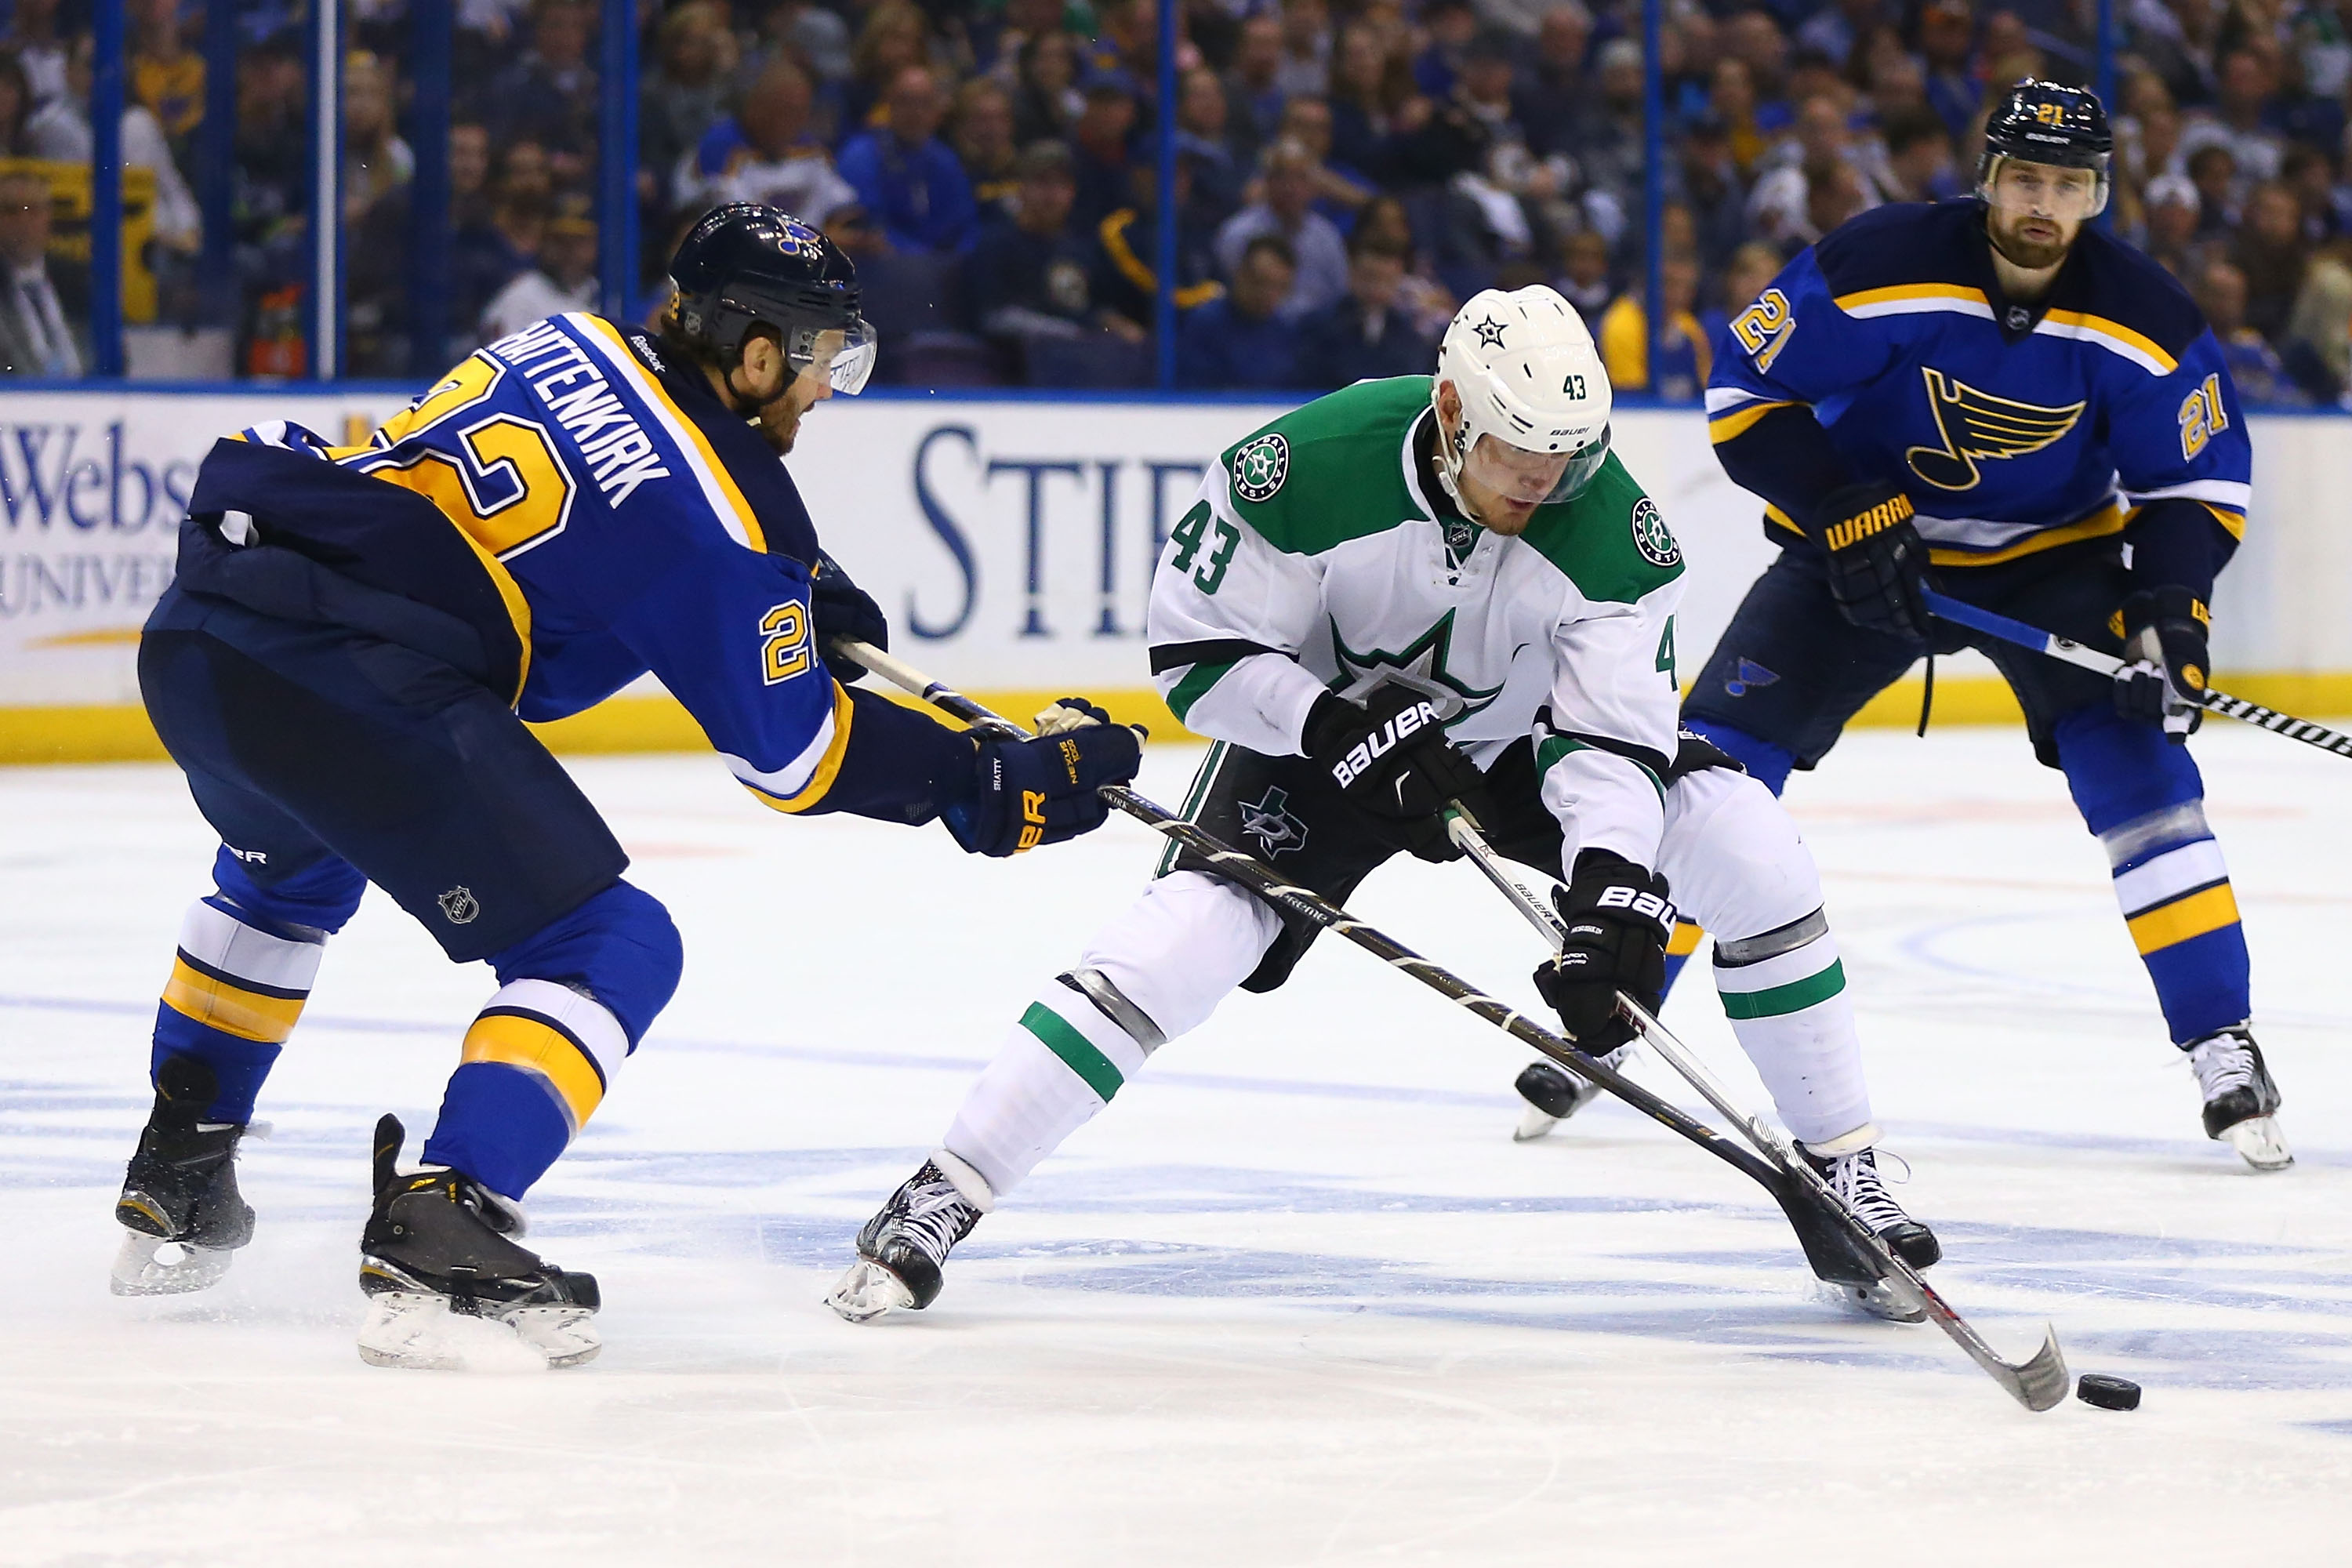 Stars vs. Blues Live Stream How to Watch Game 6 Online